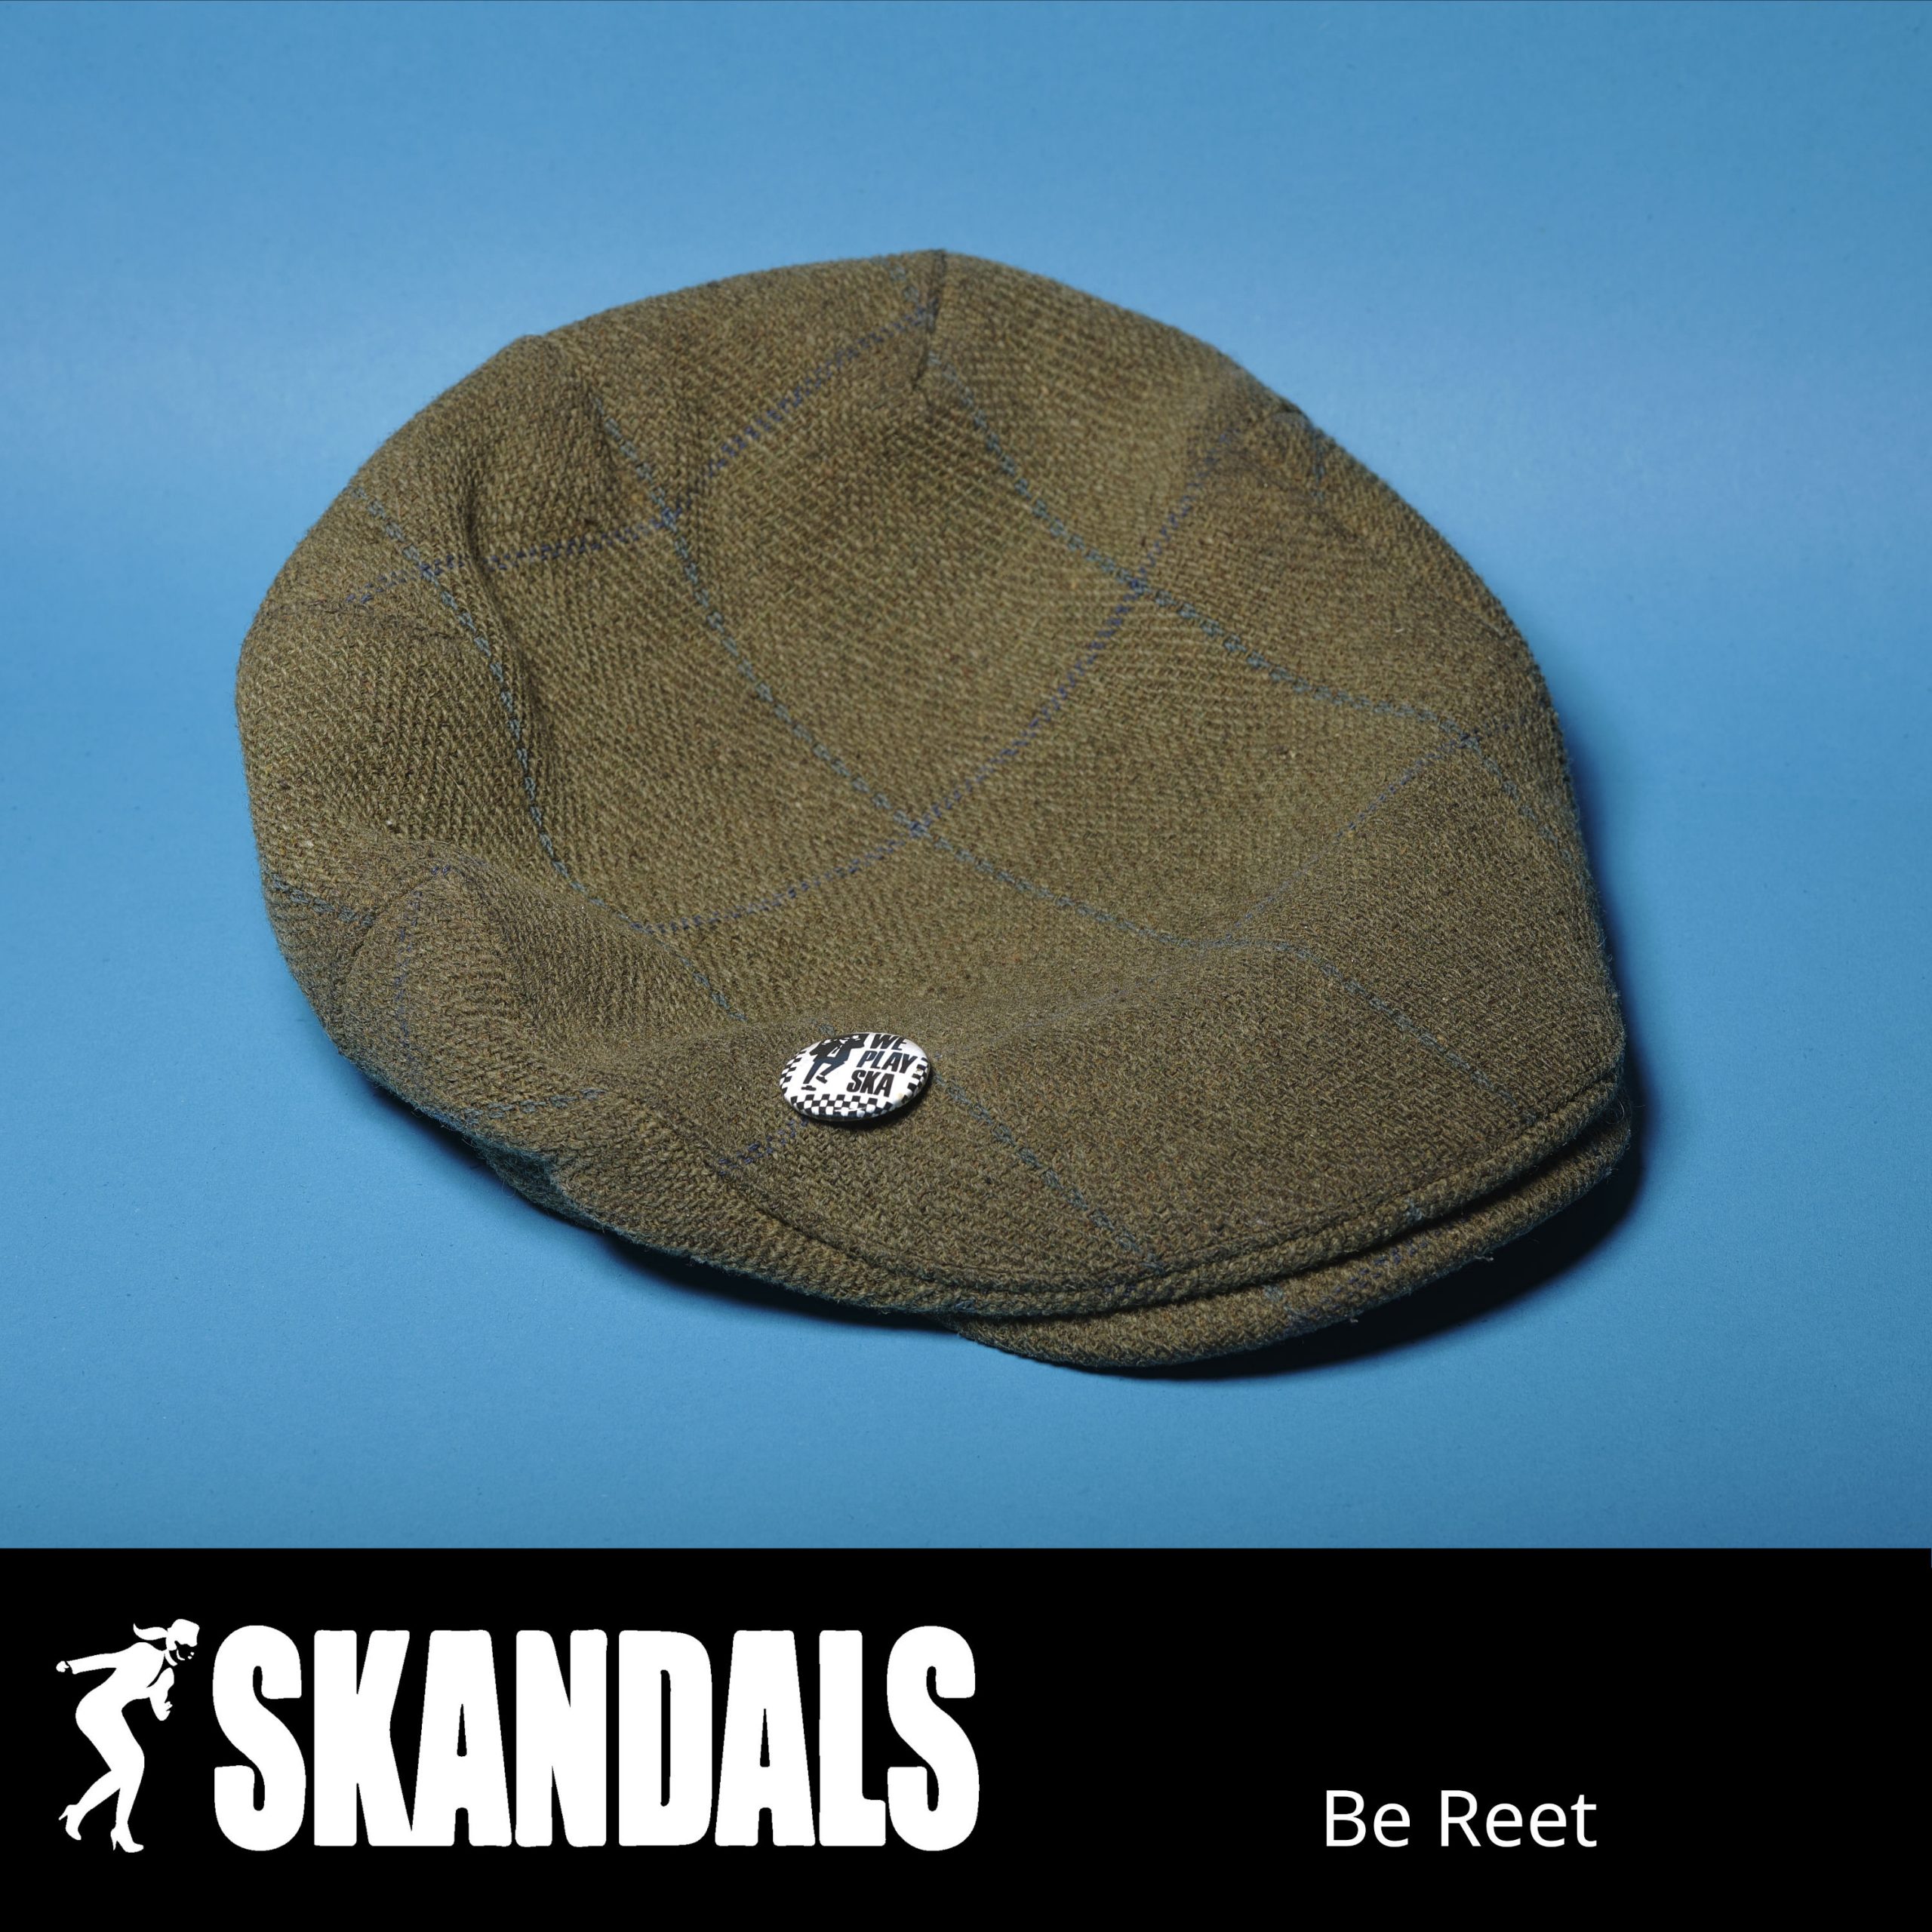 Cover for single Be Reet shows flat cap and badge that says 'we play ska'